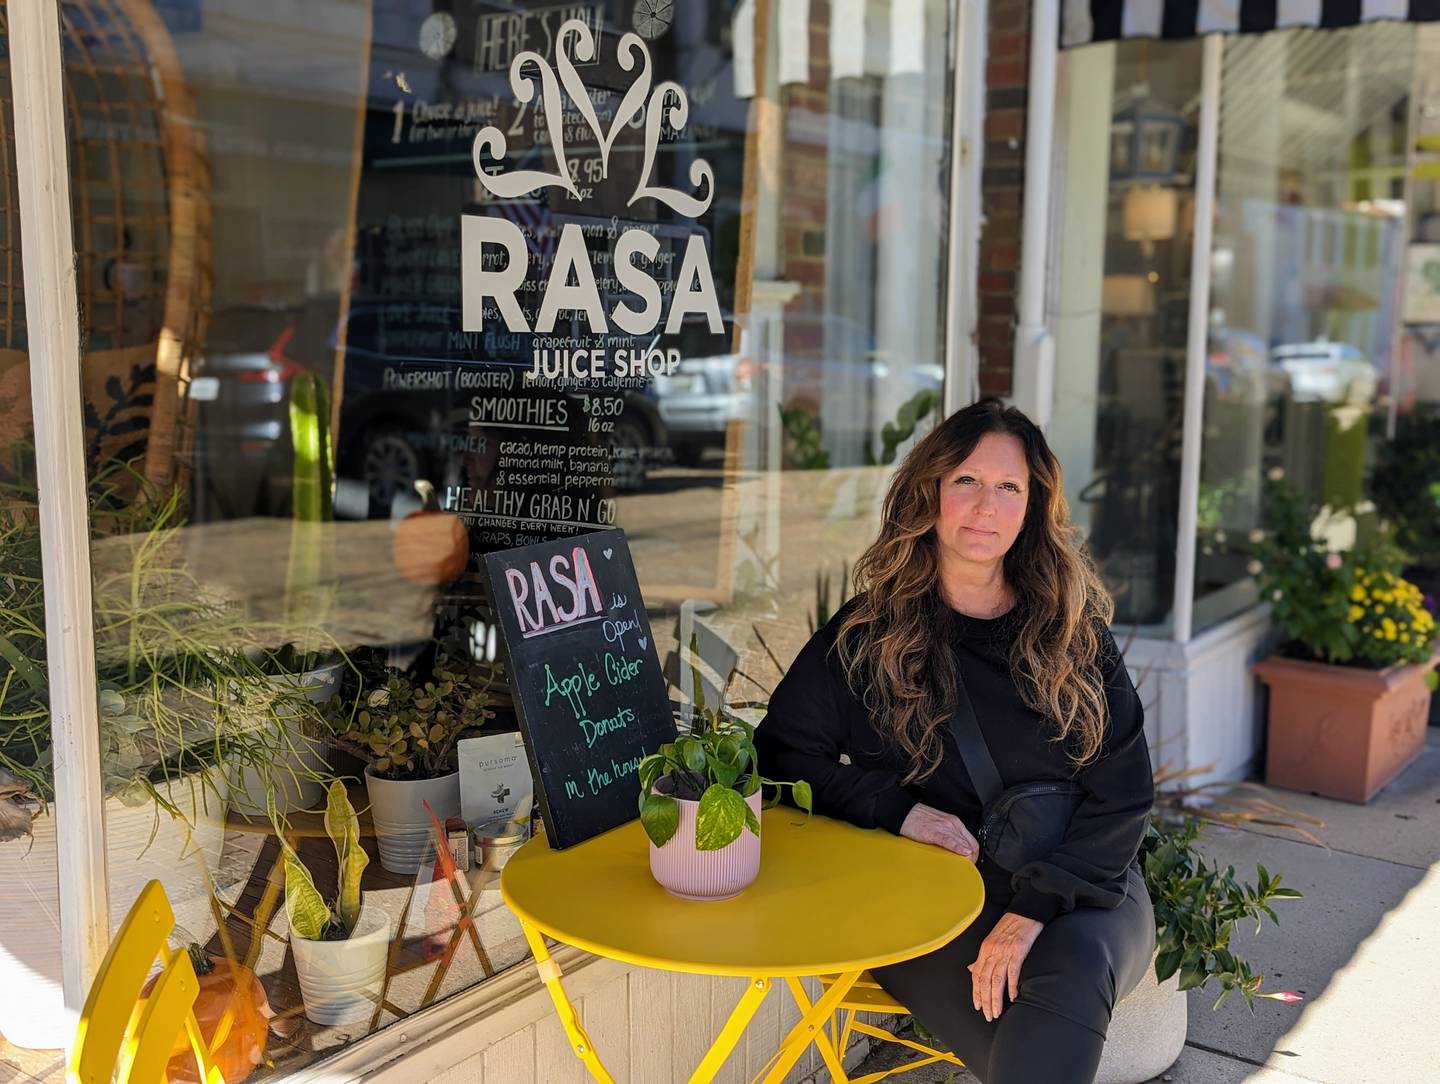 Lisa Consiglio Ryan sells juices and offers classes on wellness at her shop Rasa on Maryland Avenue in Annapolis. She can't expand because of the city interpretation of a law requiring a grease interceptor.